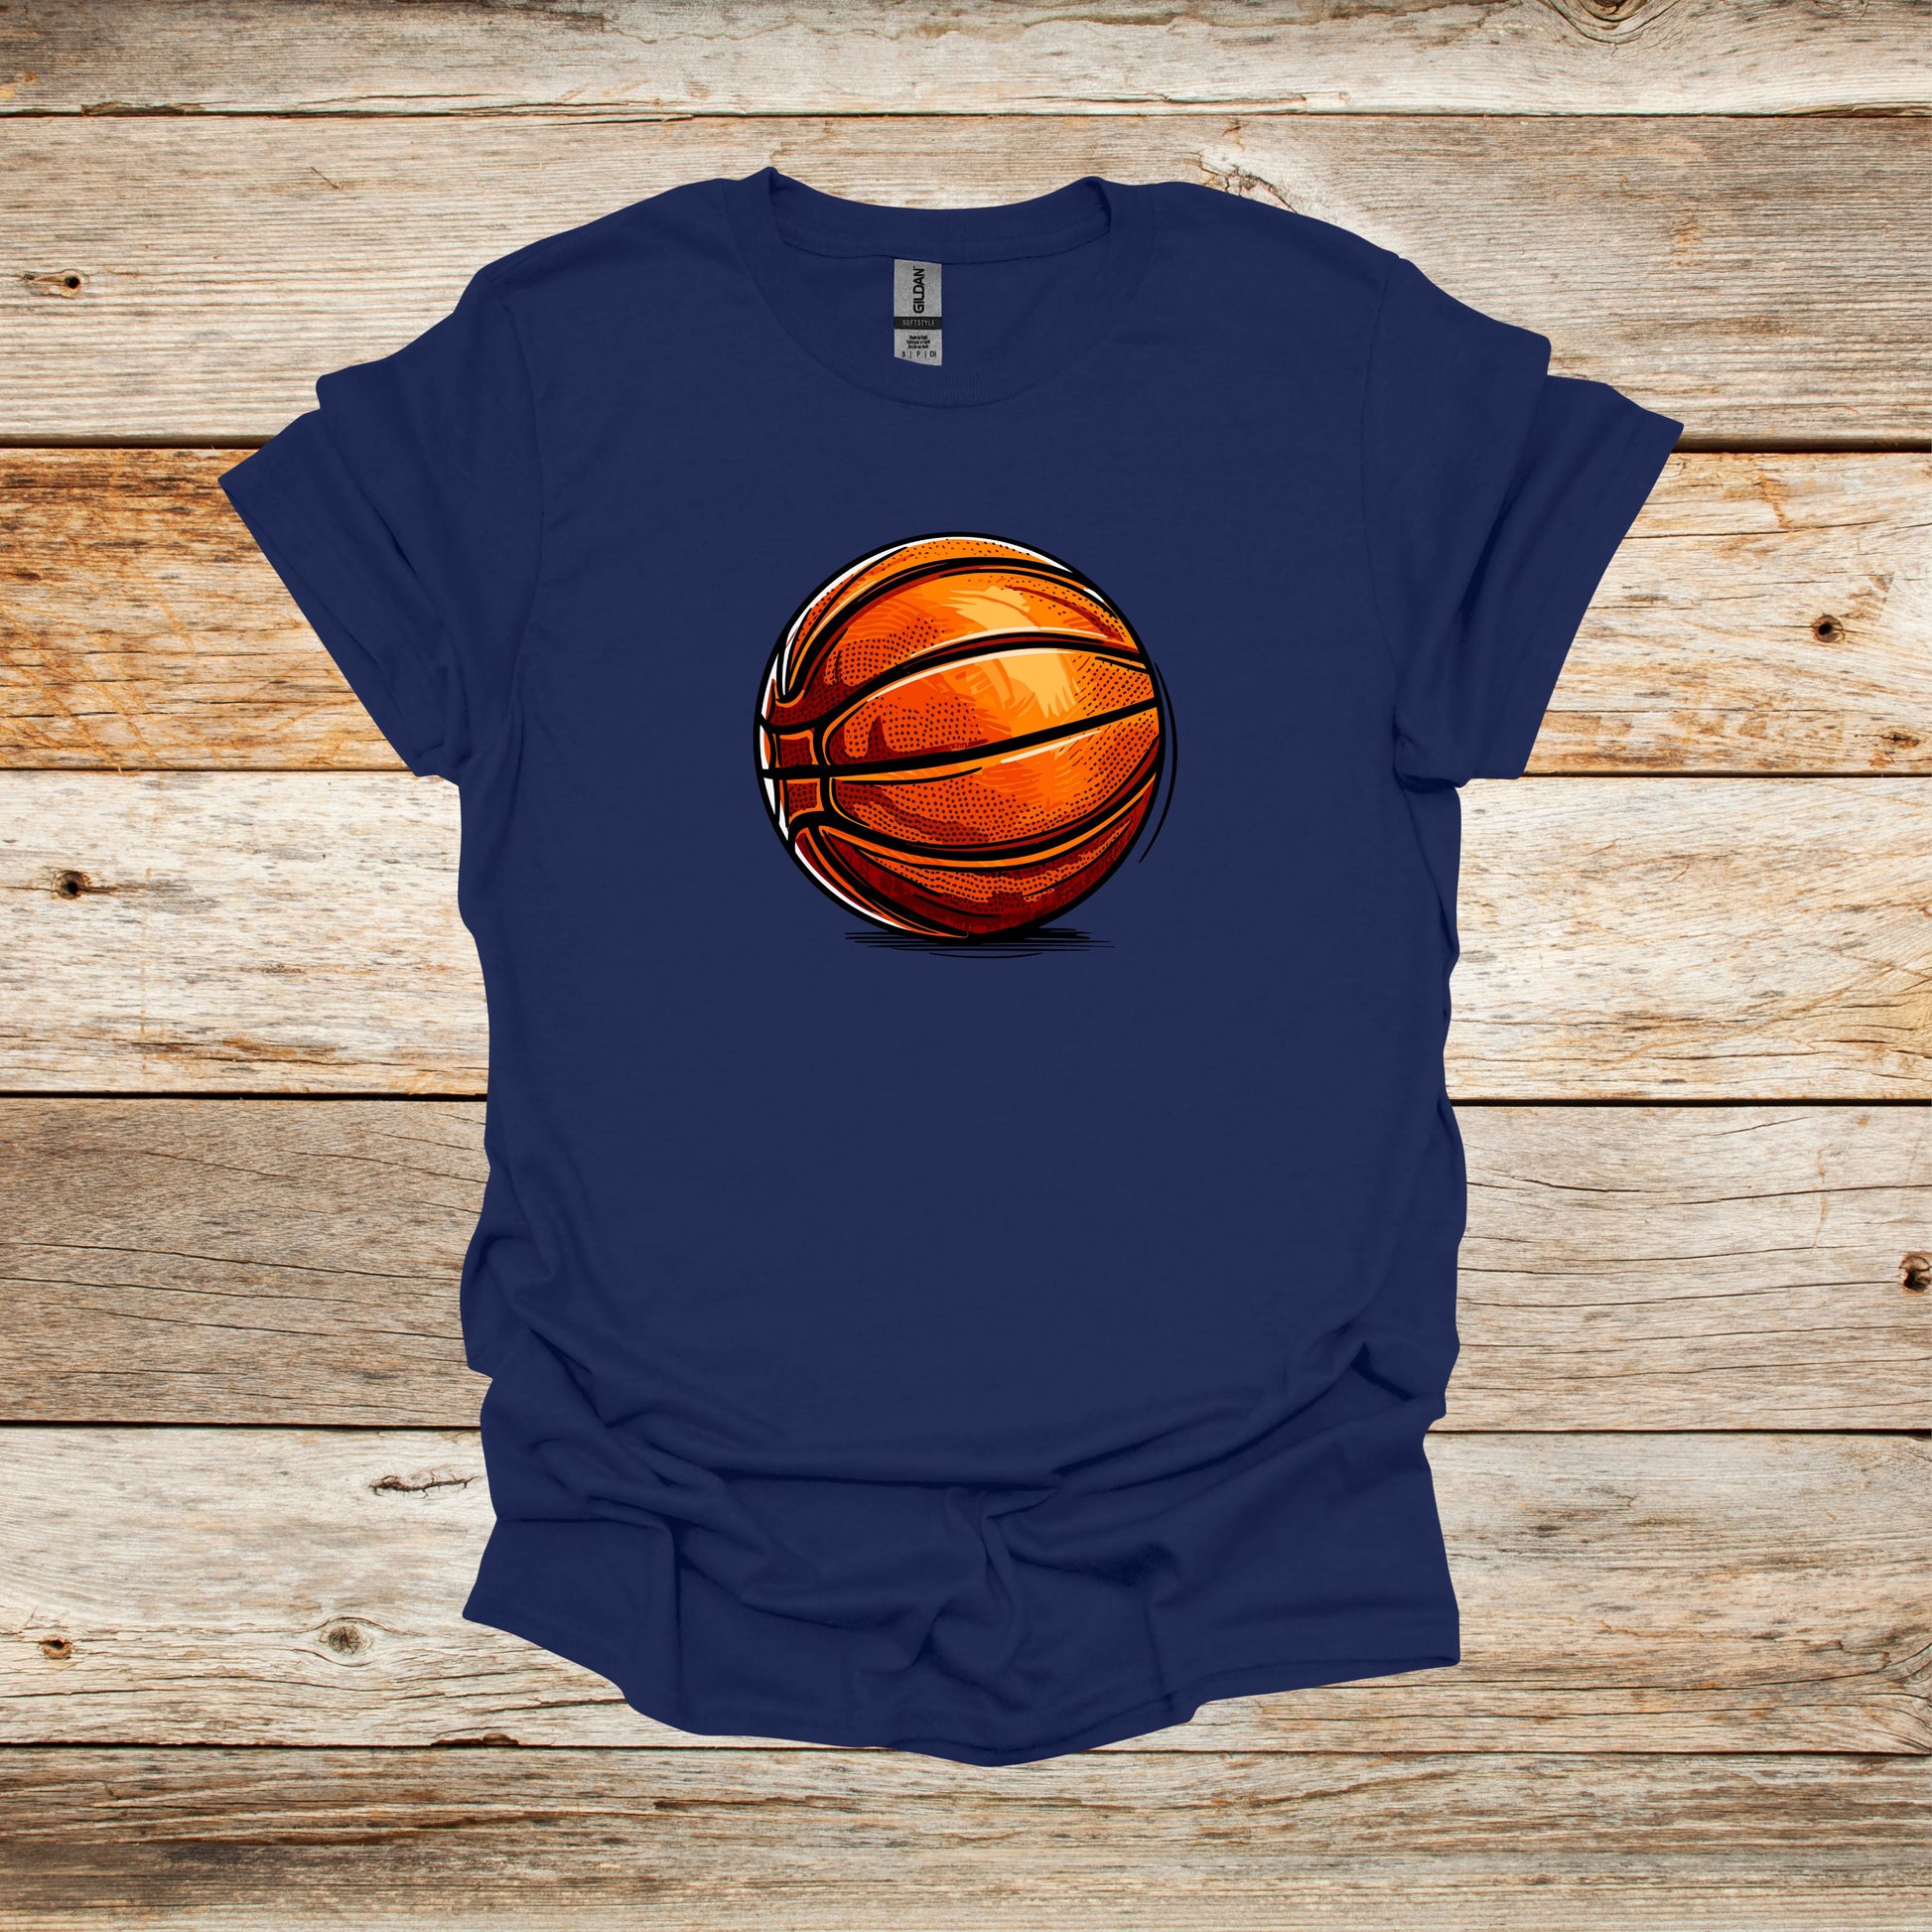 Basketball T-Shirt - Adult and Children's Tee Shirts - Sports T-Shirts Graphic Avenue Navy Adult Small 